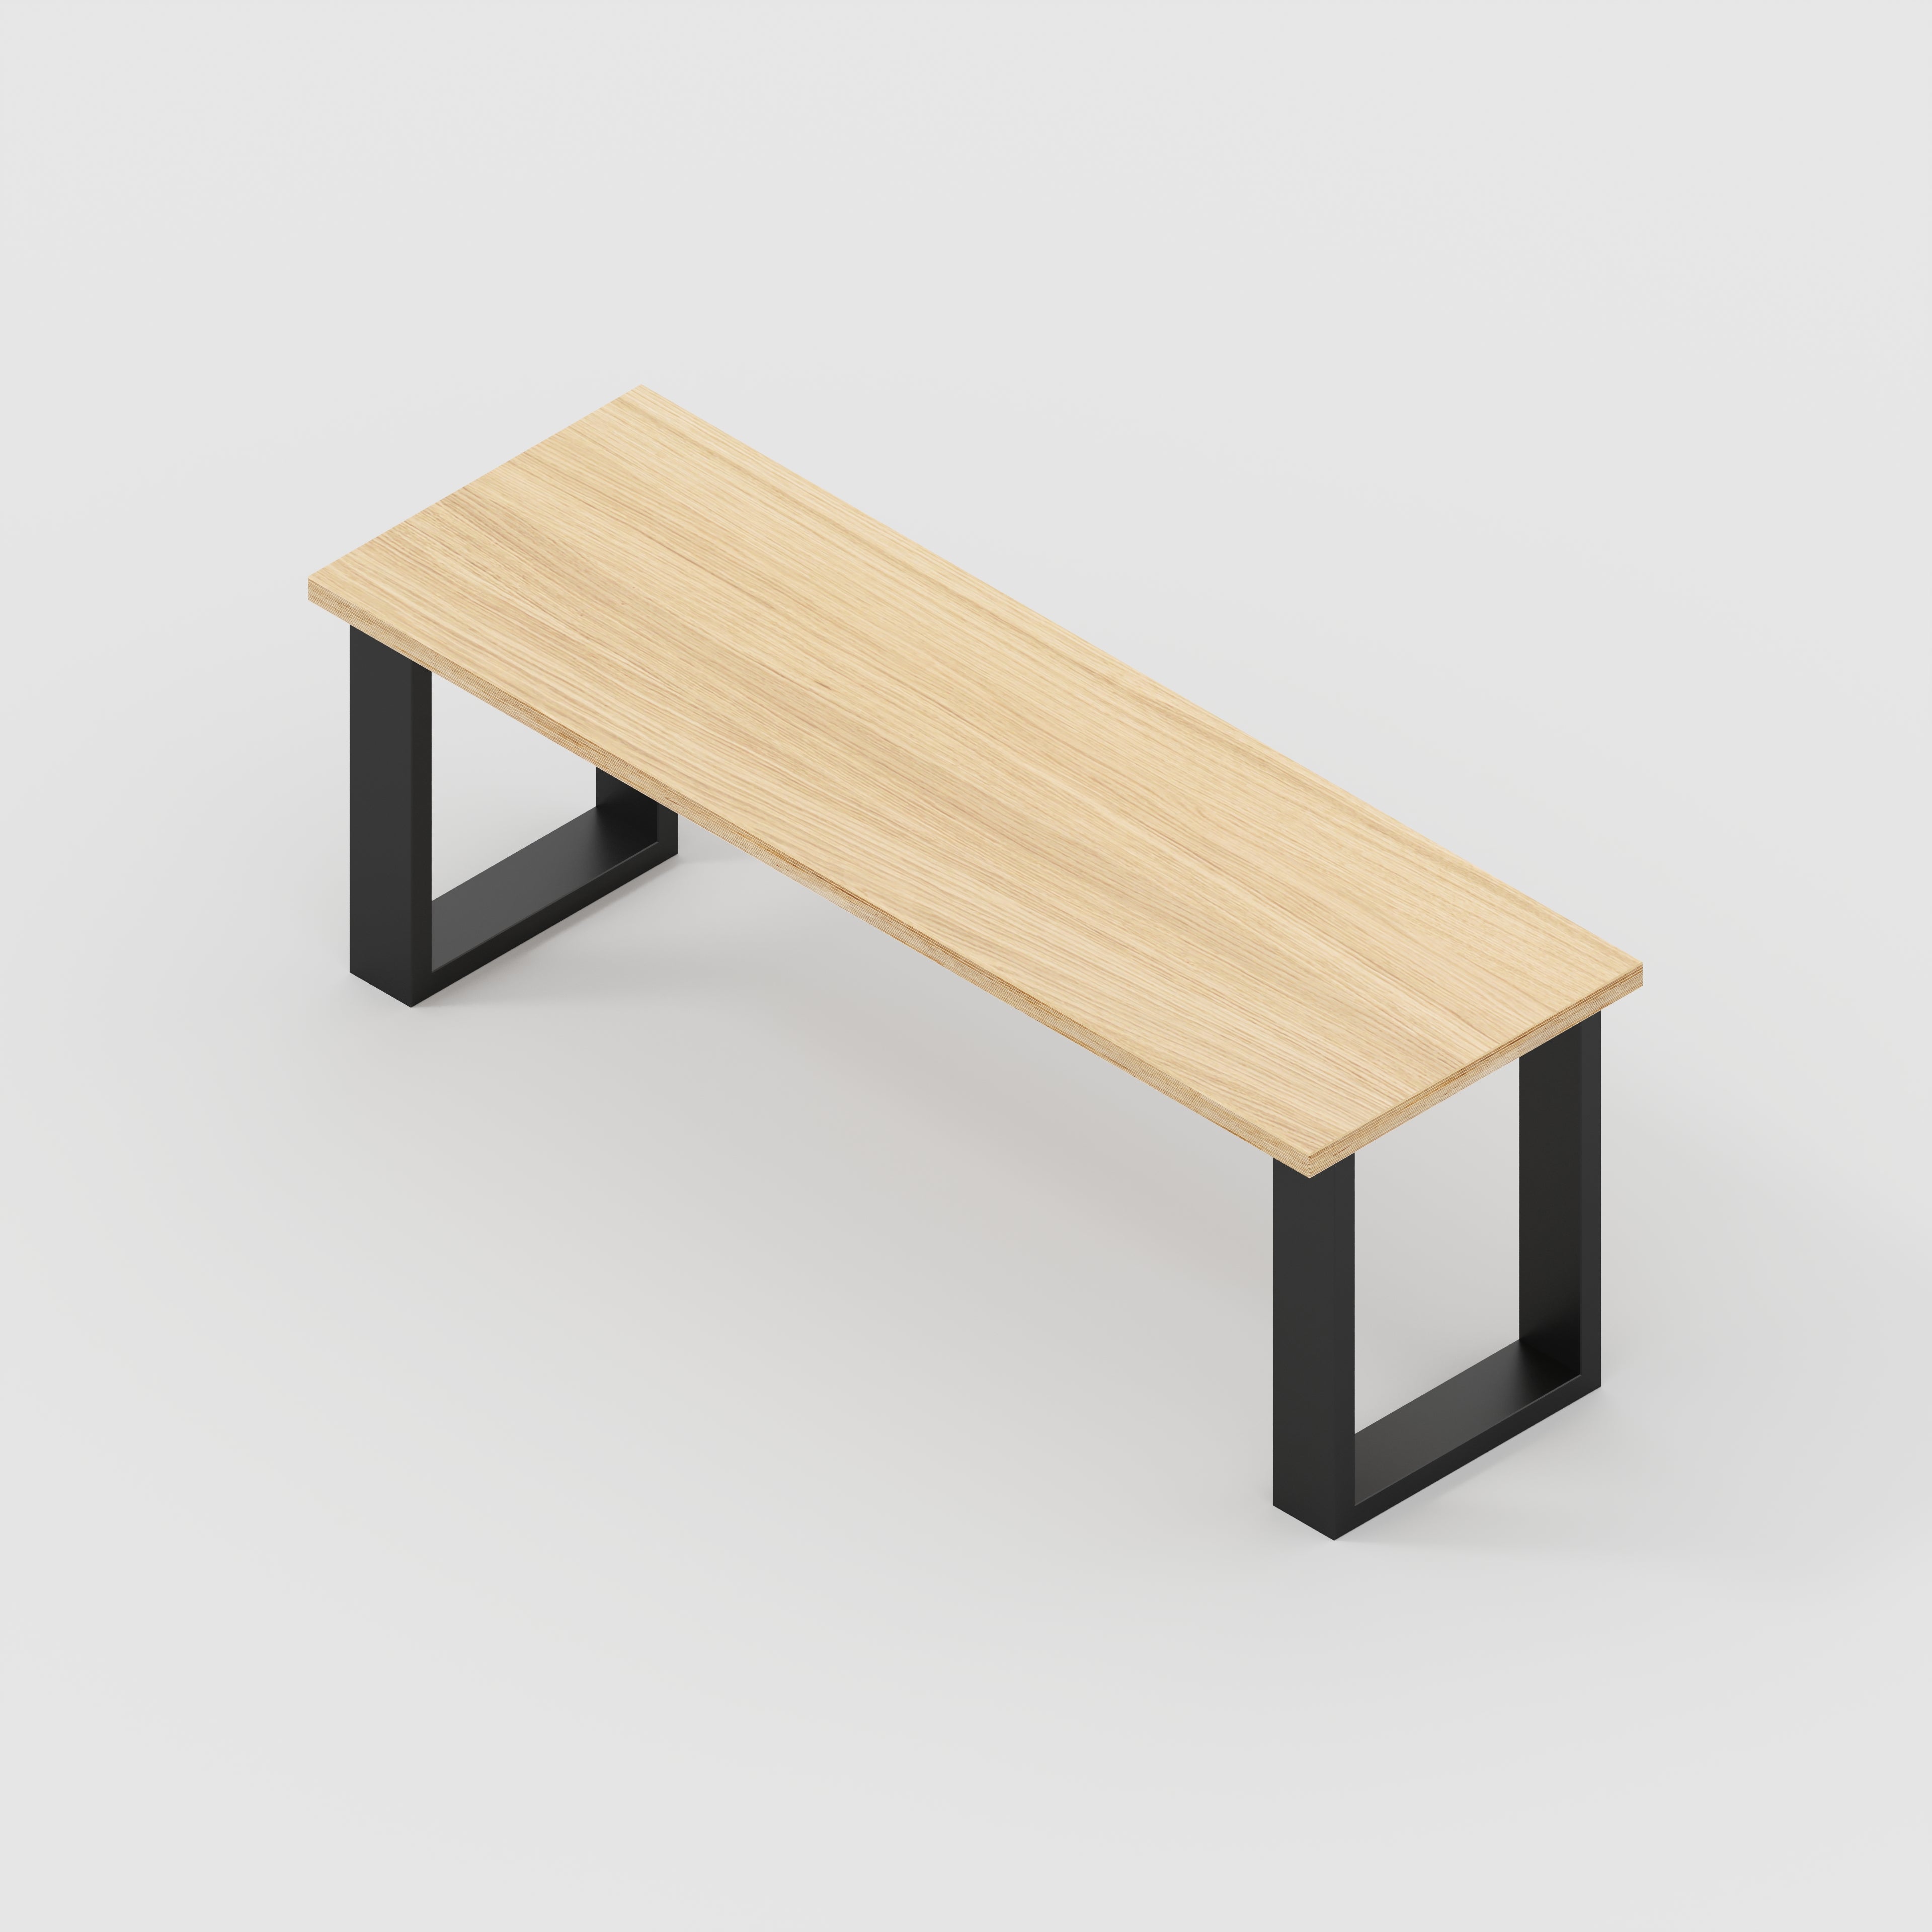 Bench Seat with Black Industrial Legs - Plywood Oak - 1200(w) x 400(d)